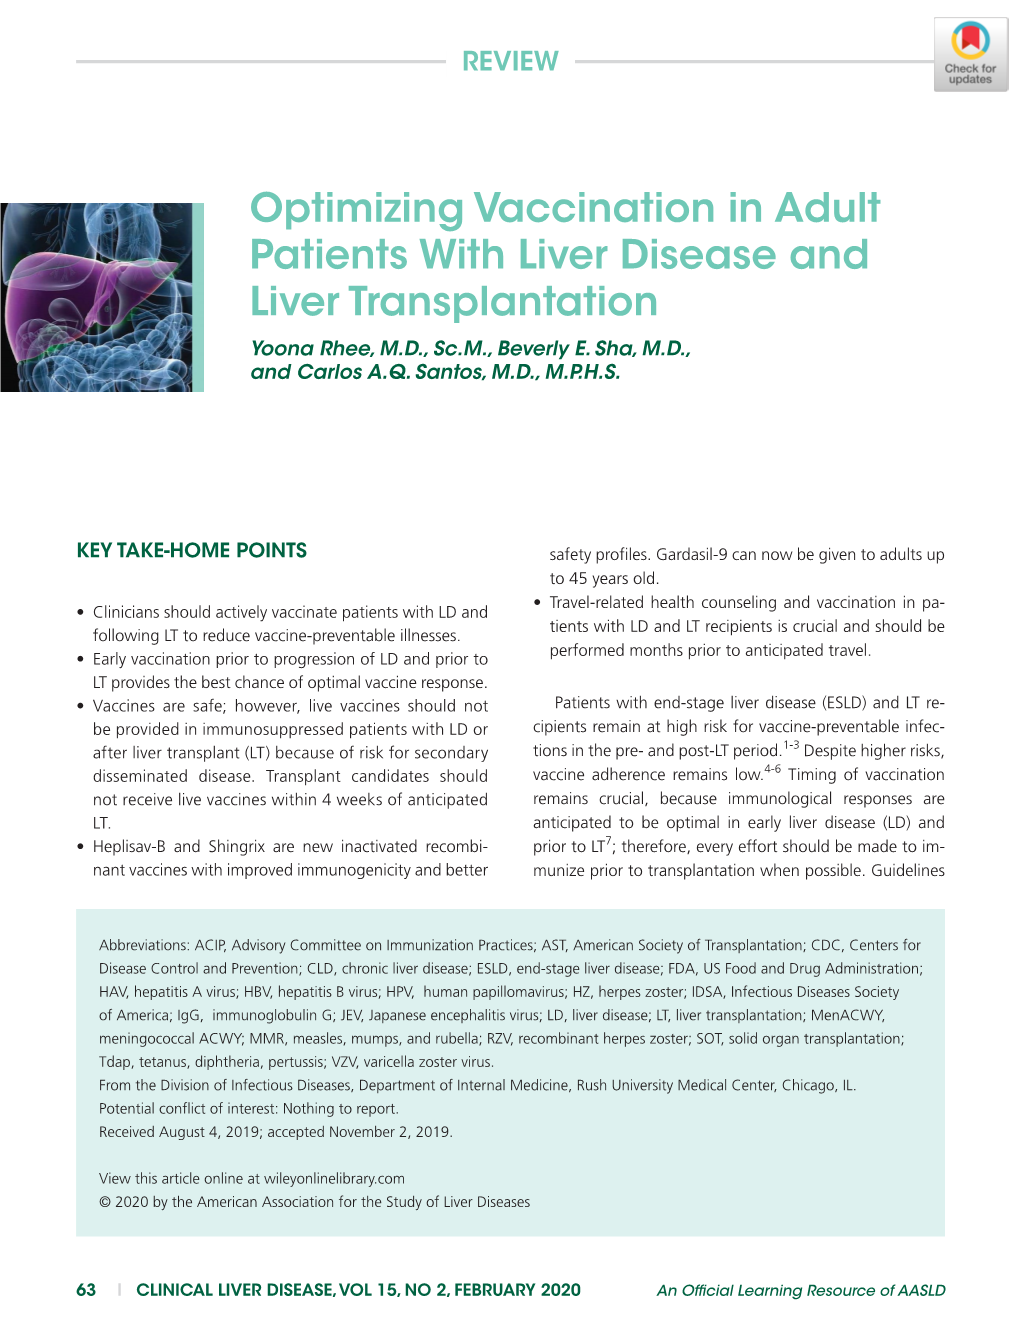 Optimizing Vaccination in Adult Patients with Liver Disease and Liver Transplantation Yoona Rhee, M.D., Sc.M., Beverly E